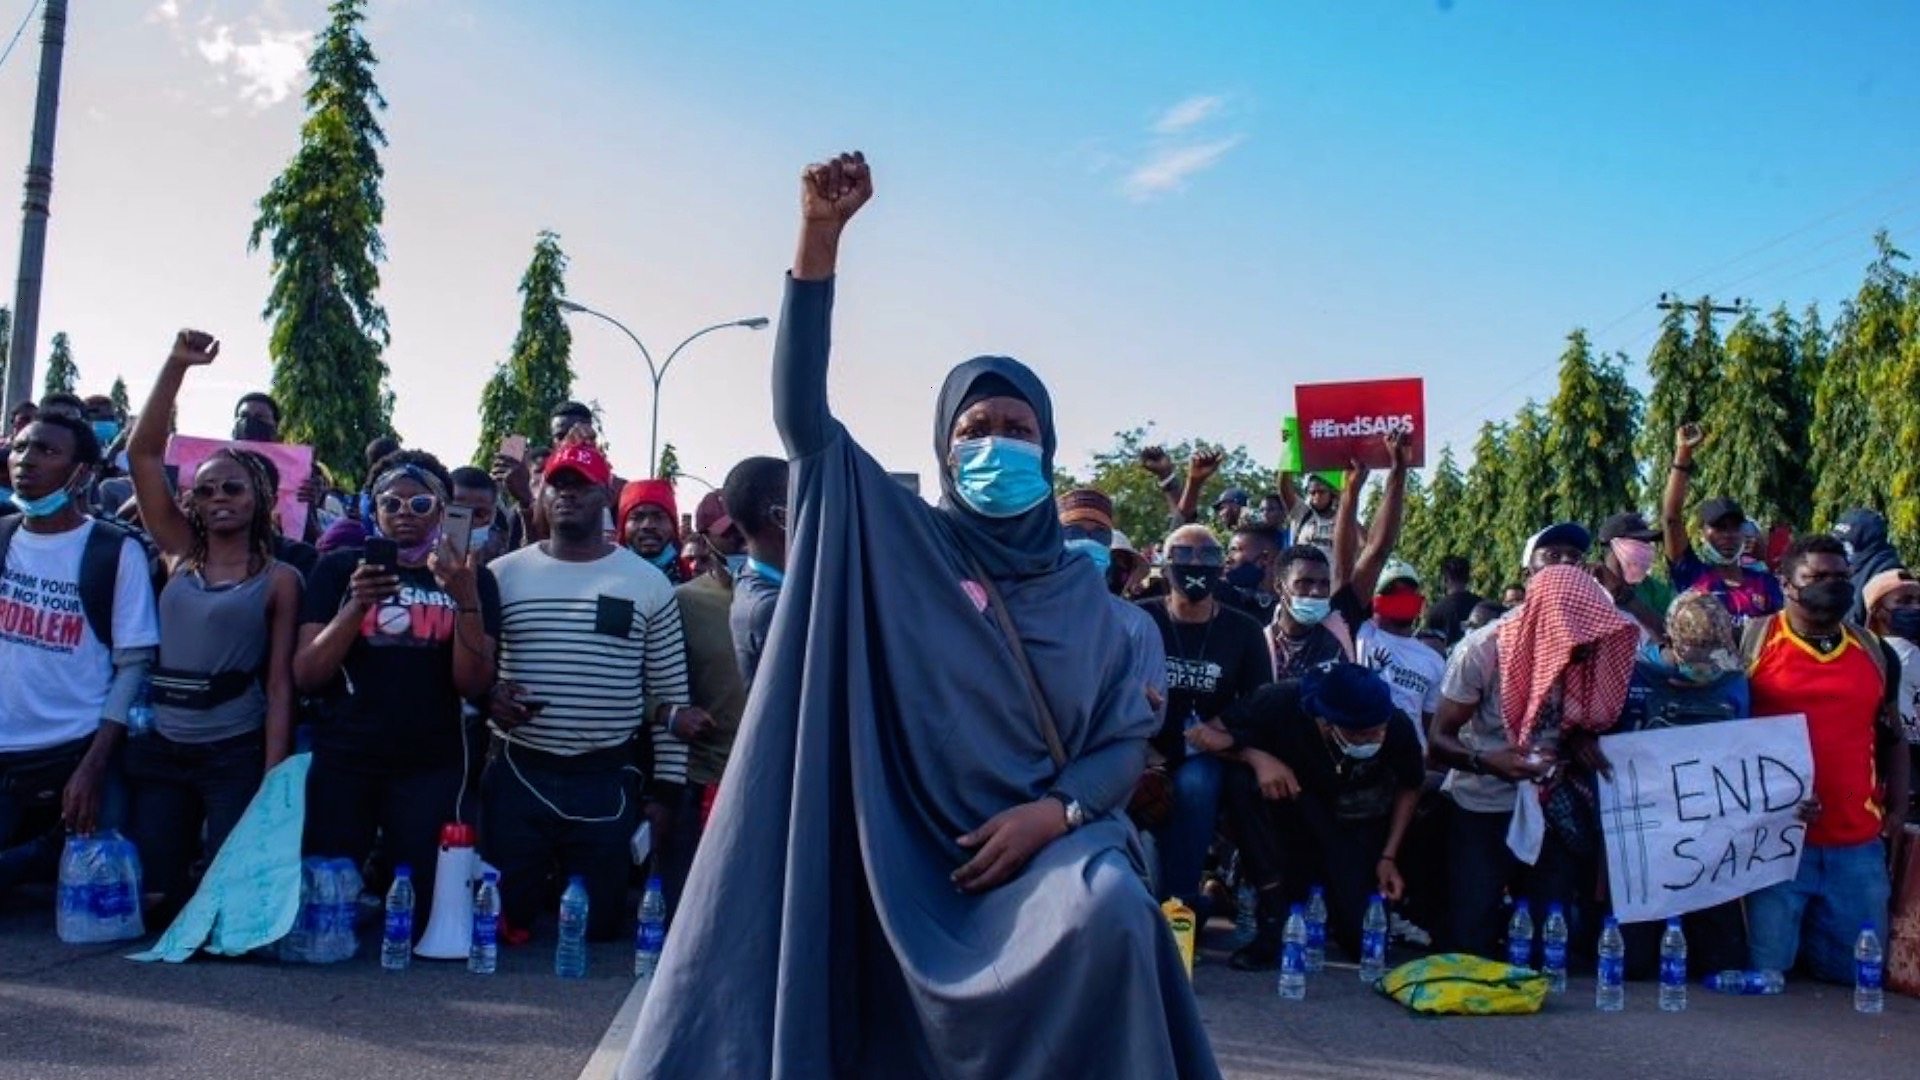 Aisha Yesufu: 'End Sars is a fight for the next generation of Nigerians' - BBC News